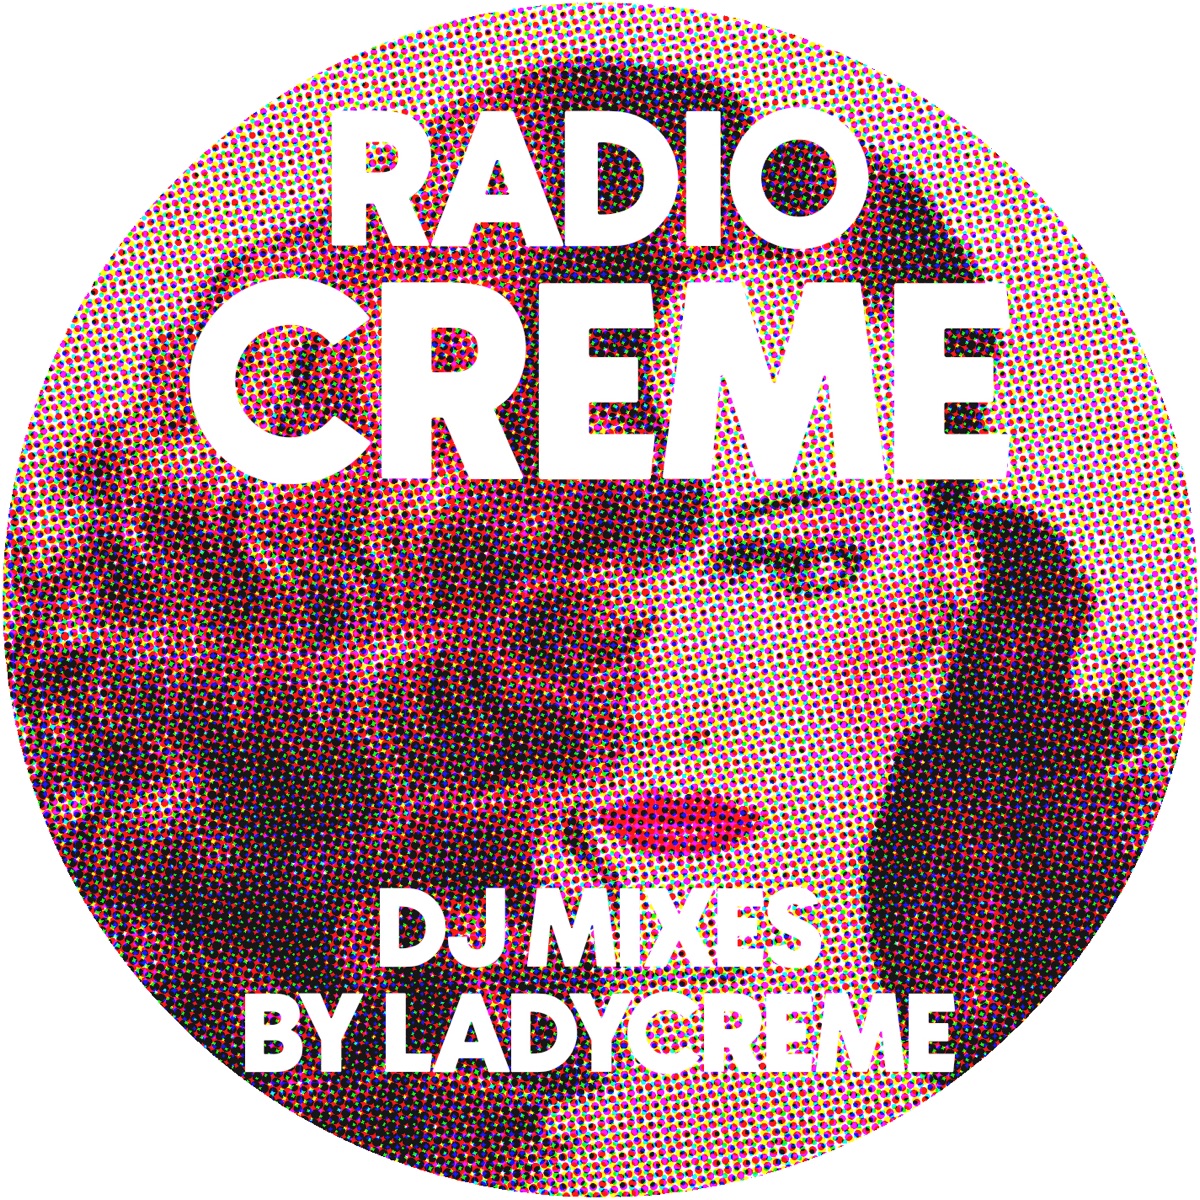 Radio Creme - DJ mixes by Ladycreme – Podcast – Podtail